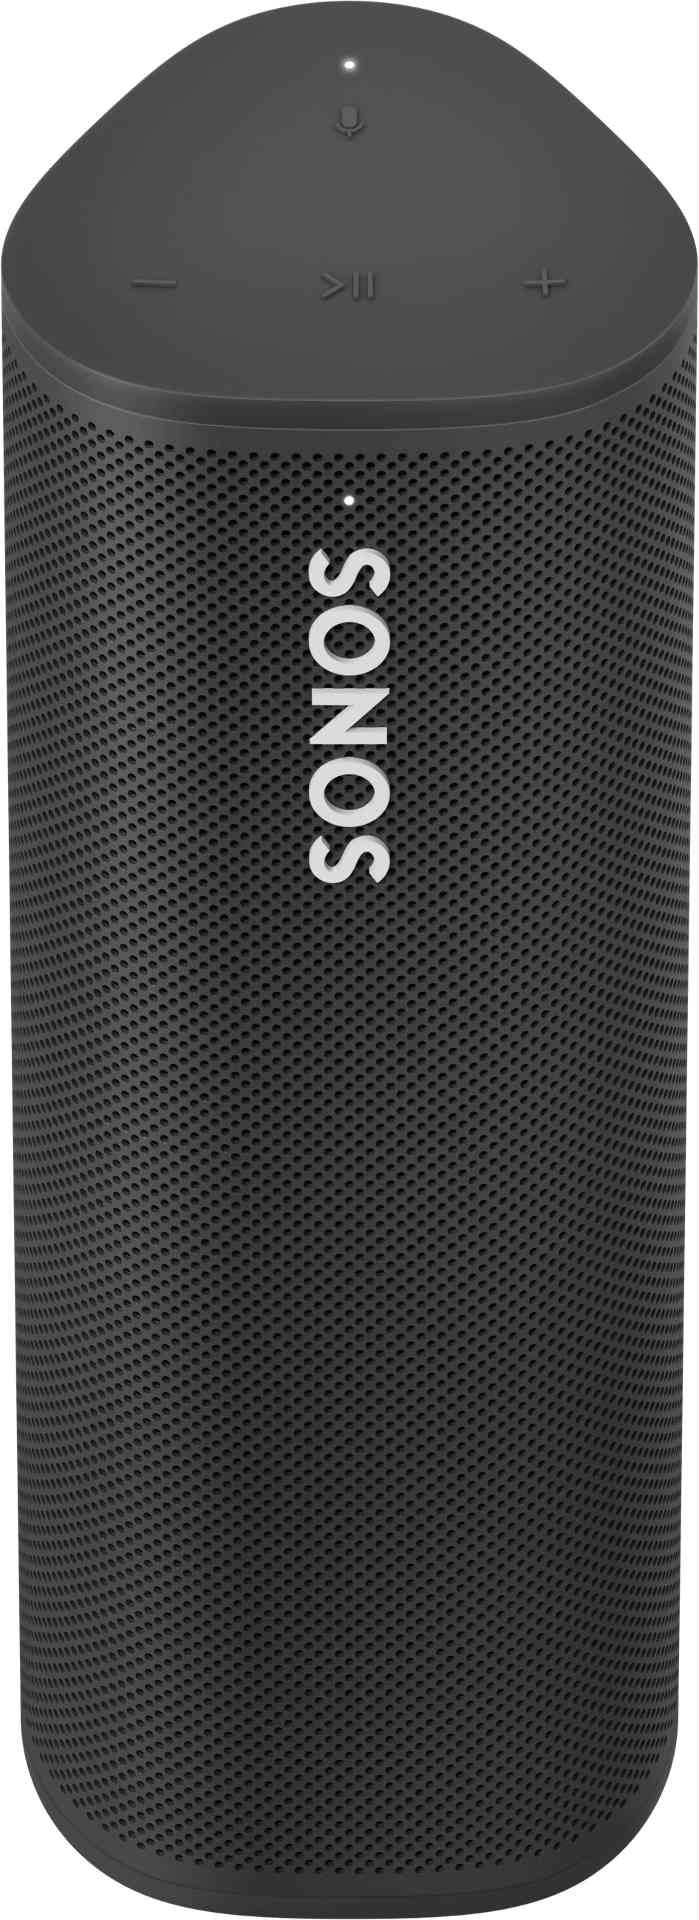 Sonos portable speakers review